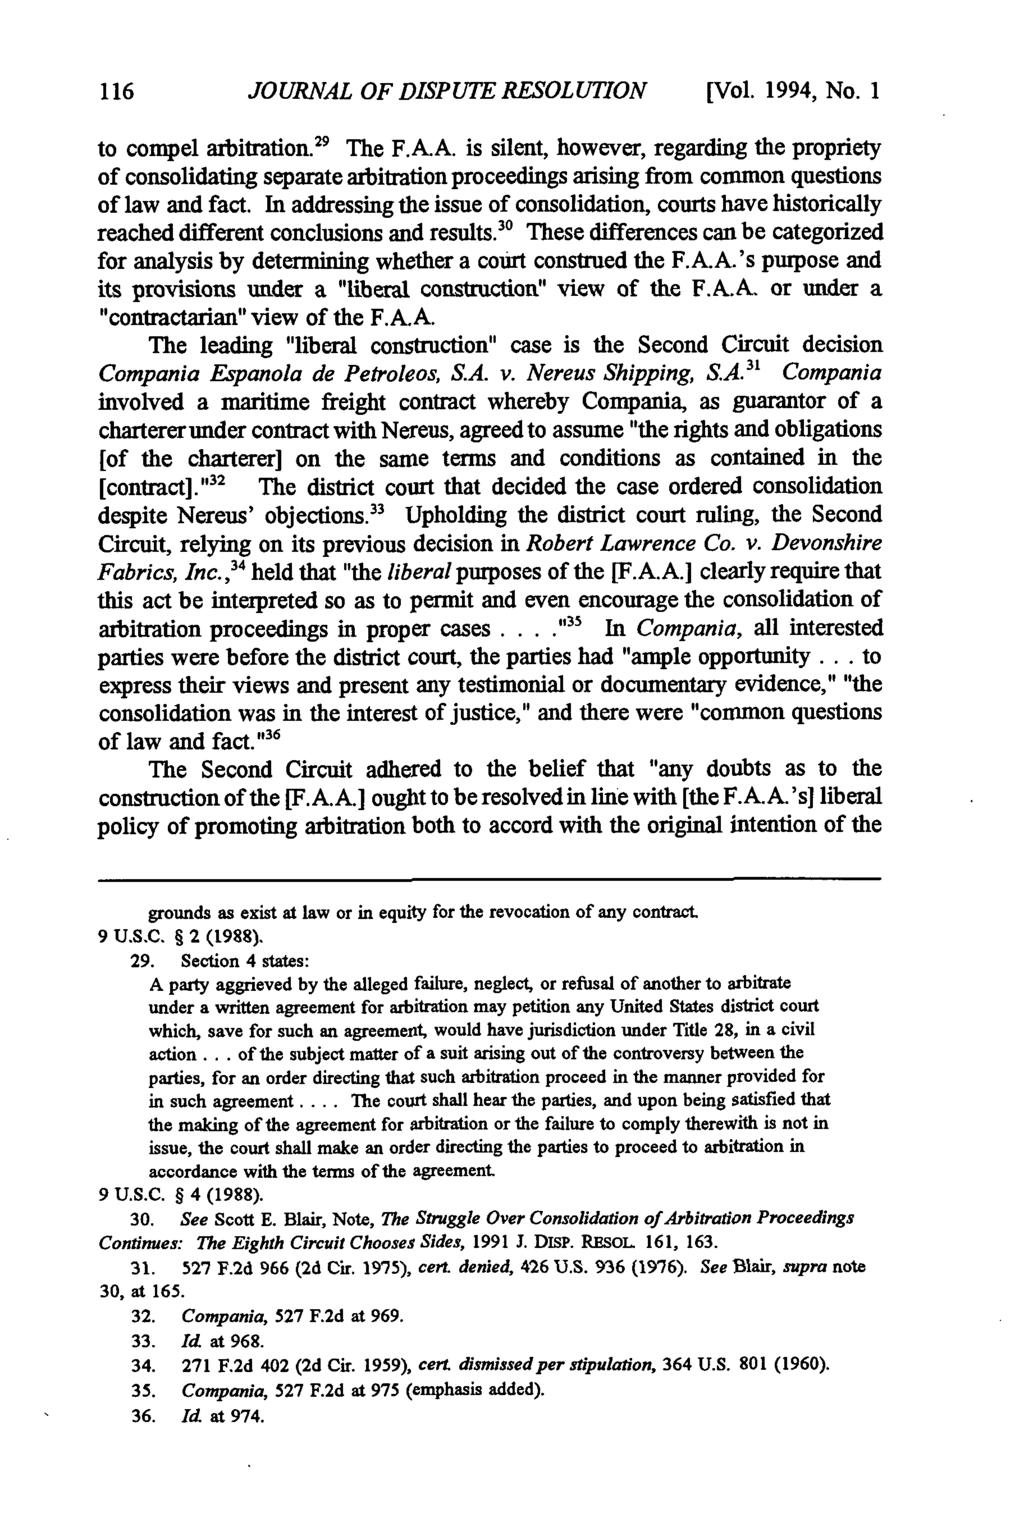 Journal of Dispute Resolution, Vol. 1994, Iss. 1 [1994], Art. 11 JOURNAL OF DISPUTE RESOLUTION [Vol. 1994, No. I to compel arbitration. 29 The F.A.A. is silent, however, regarding the propriety of consolidating separate arbitration proceedings arising from common questions of law and fact.